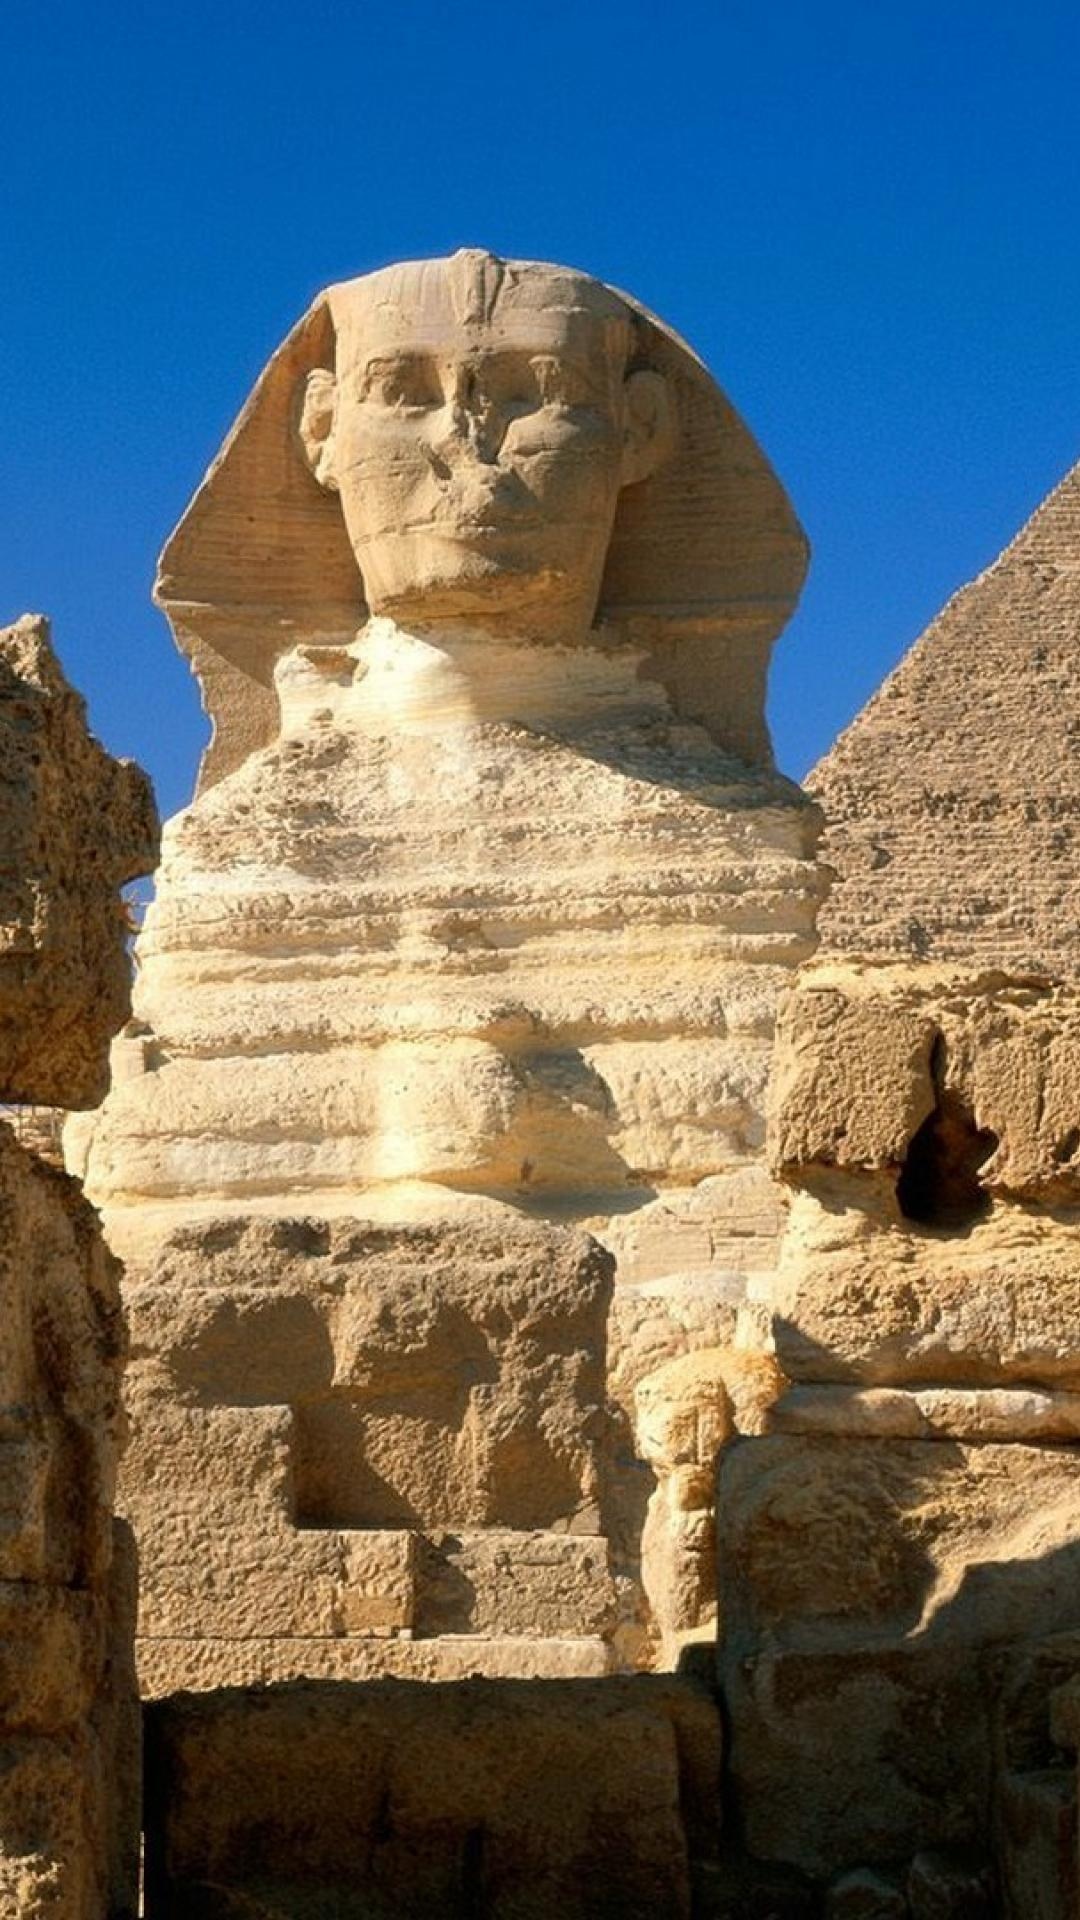 The Great Sphinx, Sphinx wallpaper, Ancient Egyptian, HD images, 1080x1920 Full HD Phone